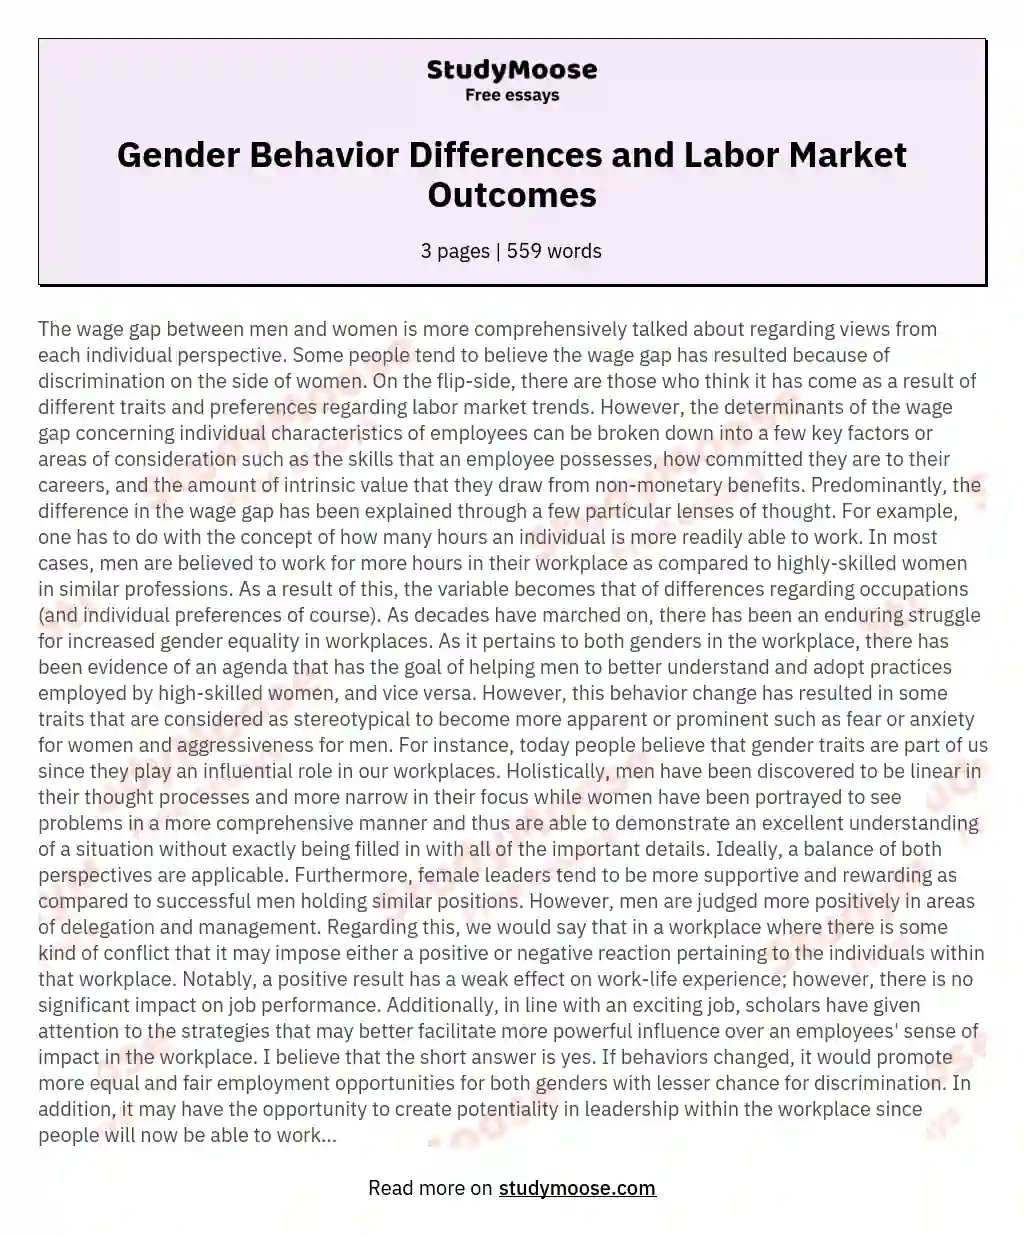 Gender Behavior Differences and Labor Market Outcomes essay